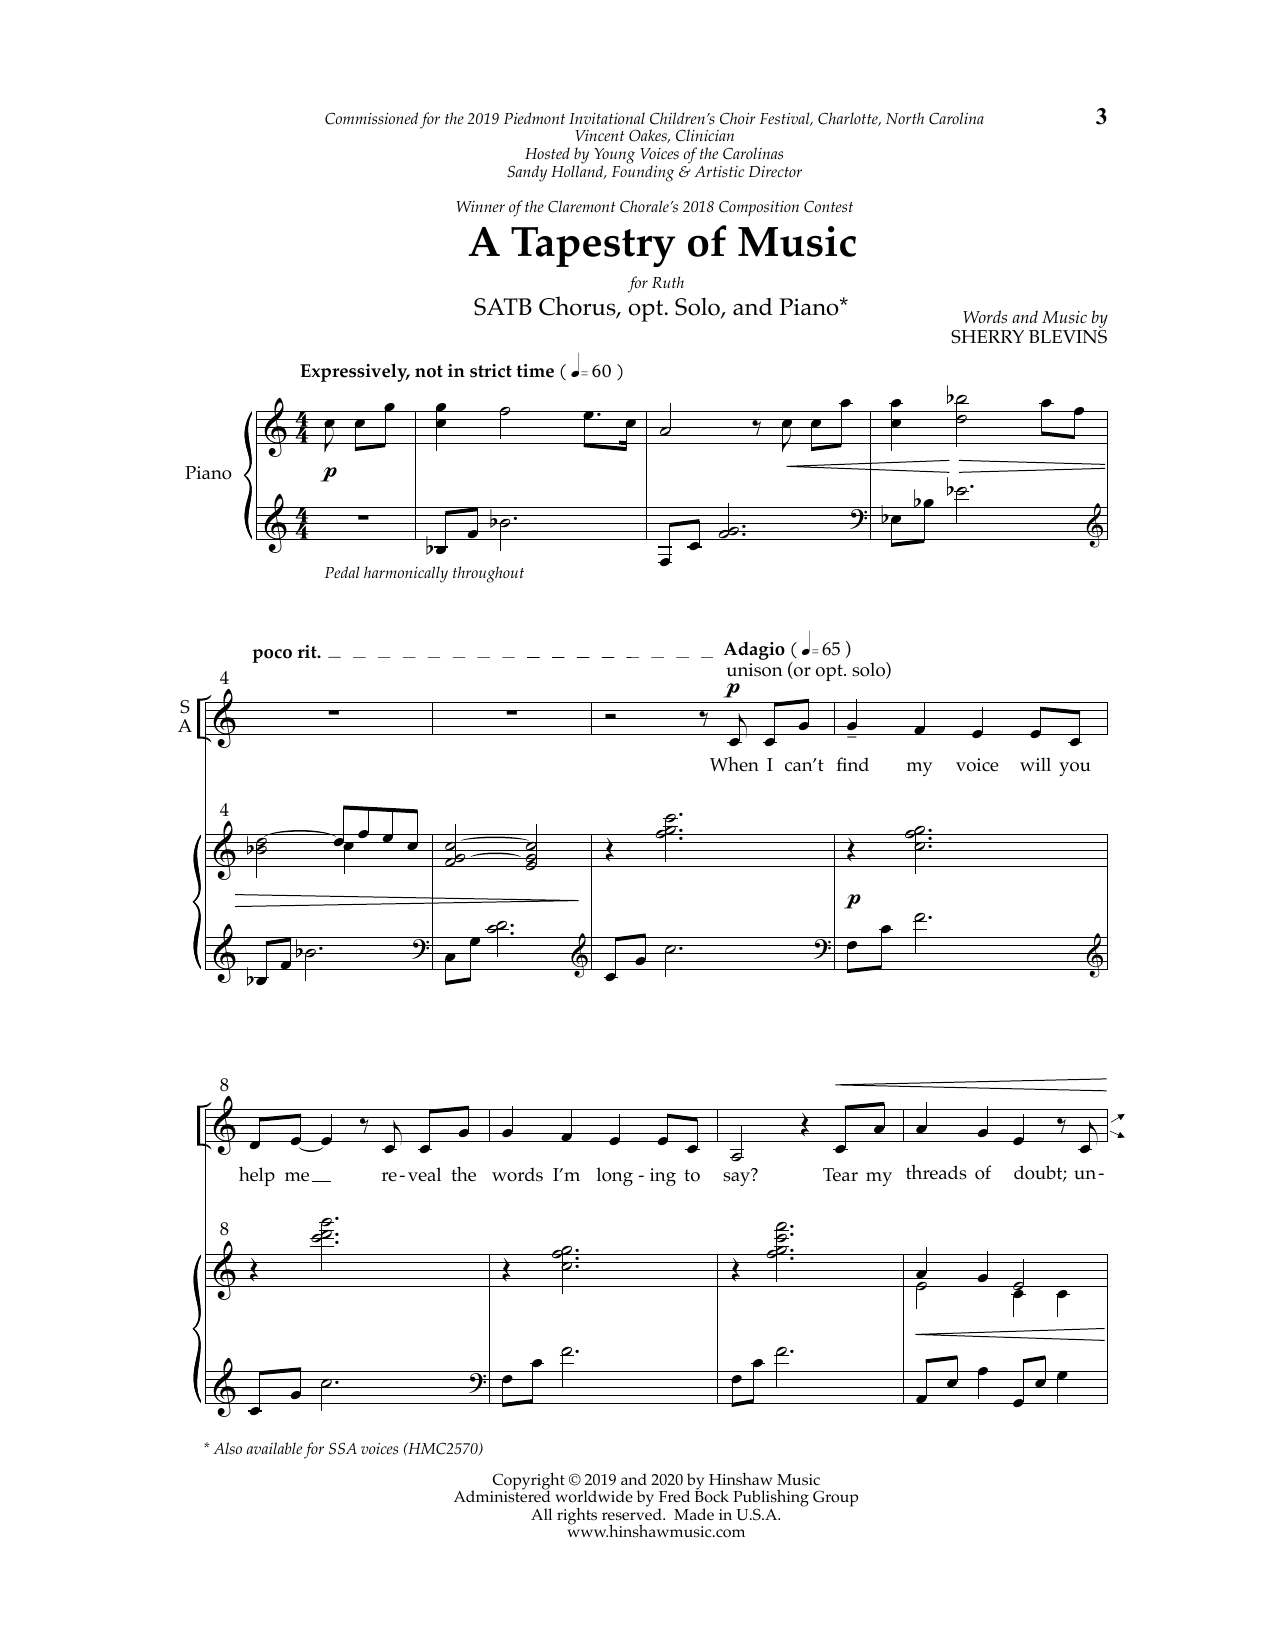 Download Sherry Blevins A Tapestry of Music Sheet Music